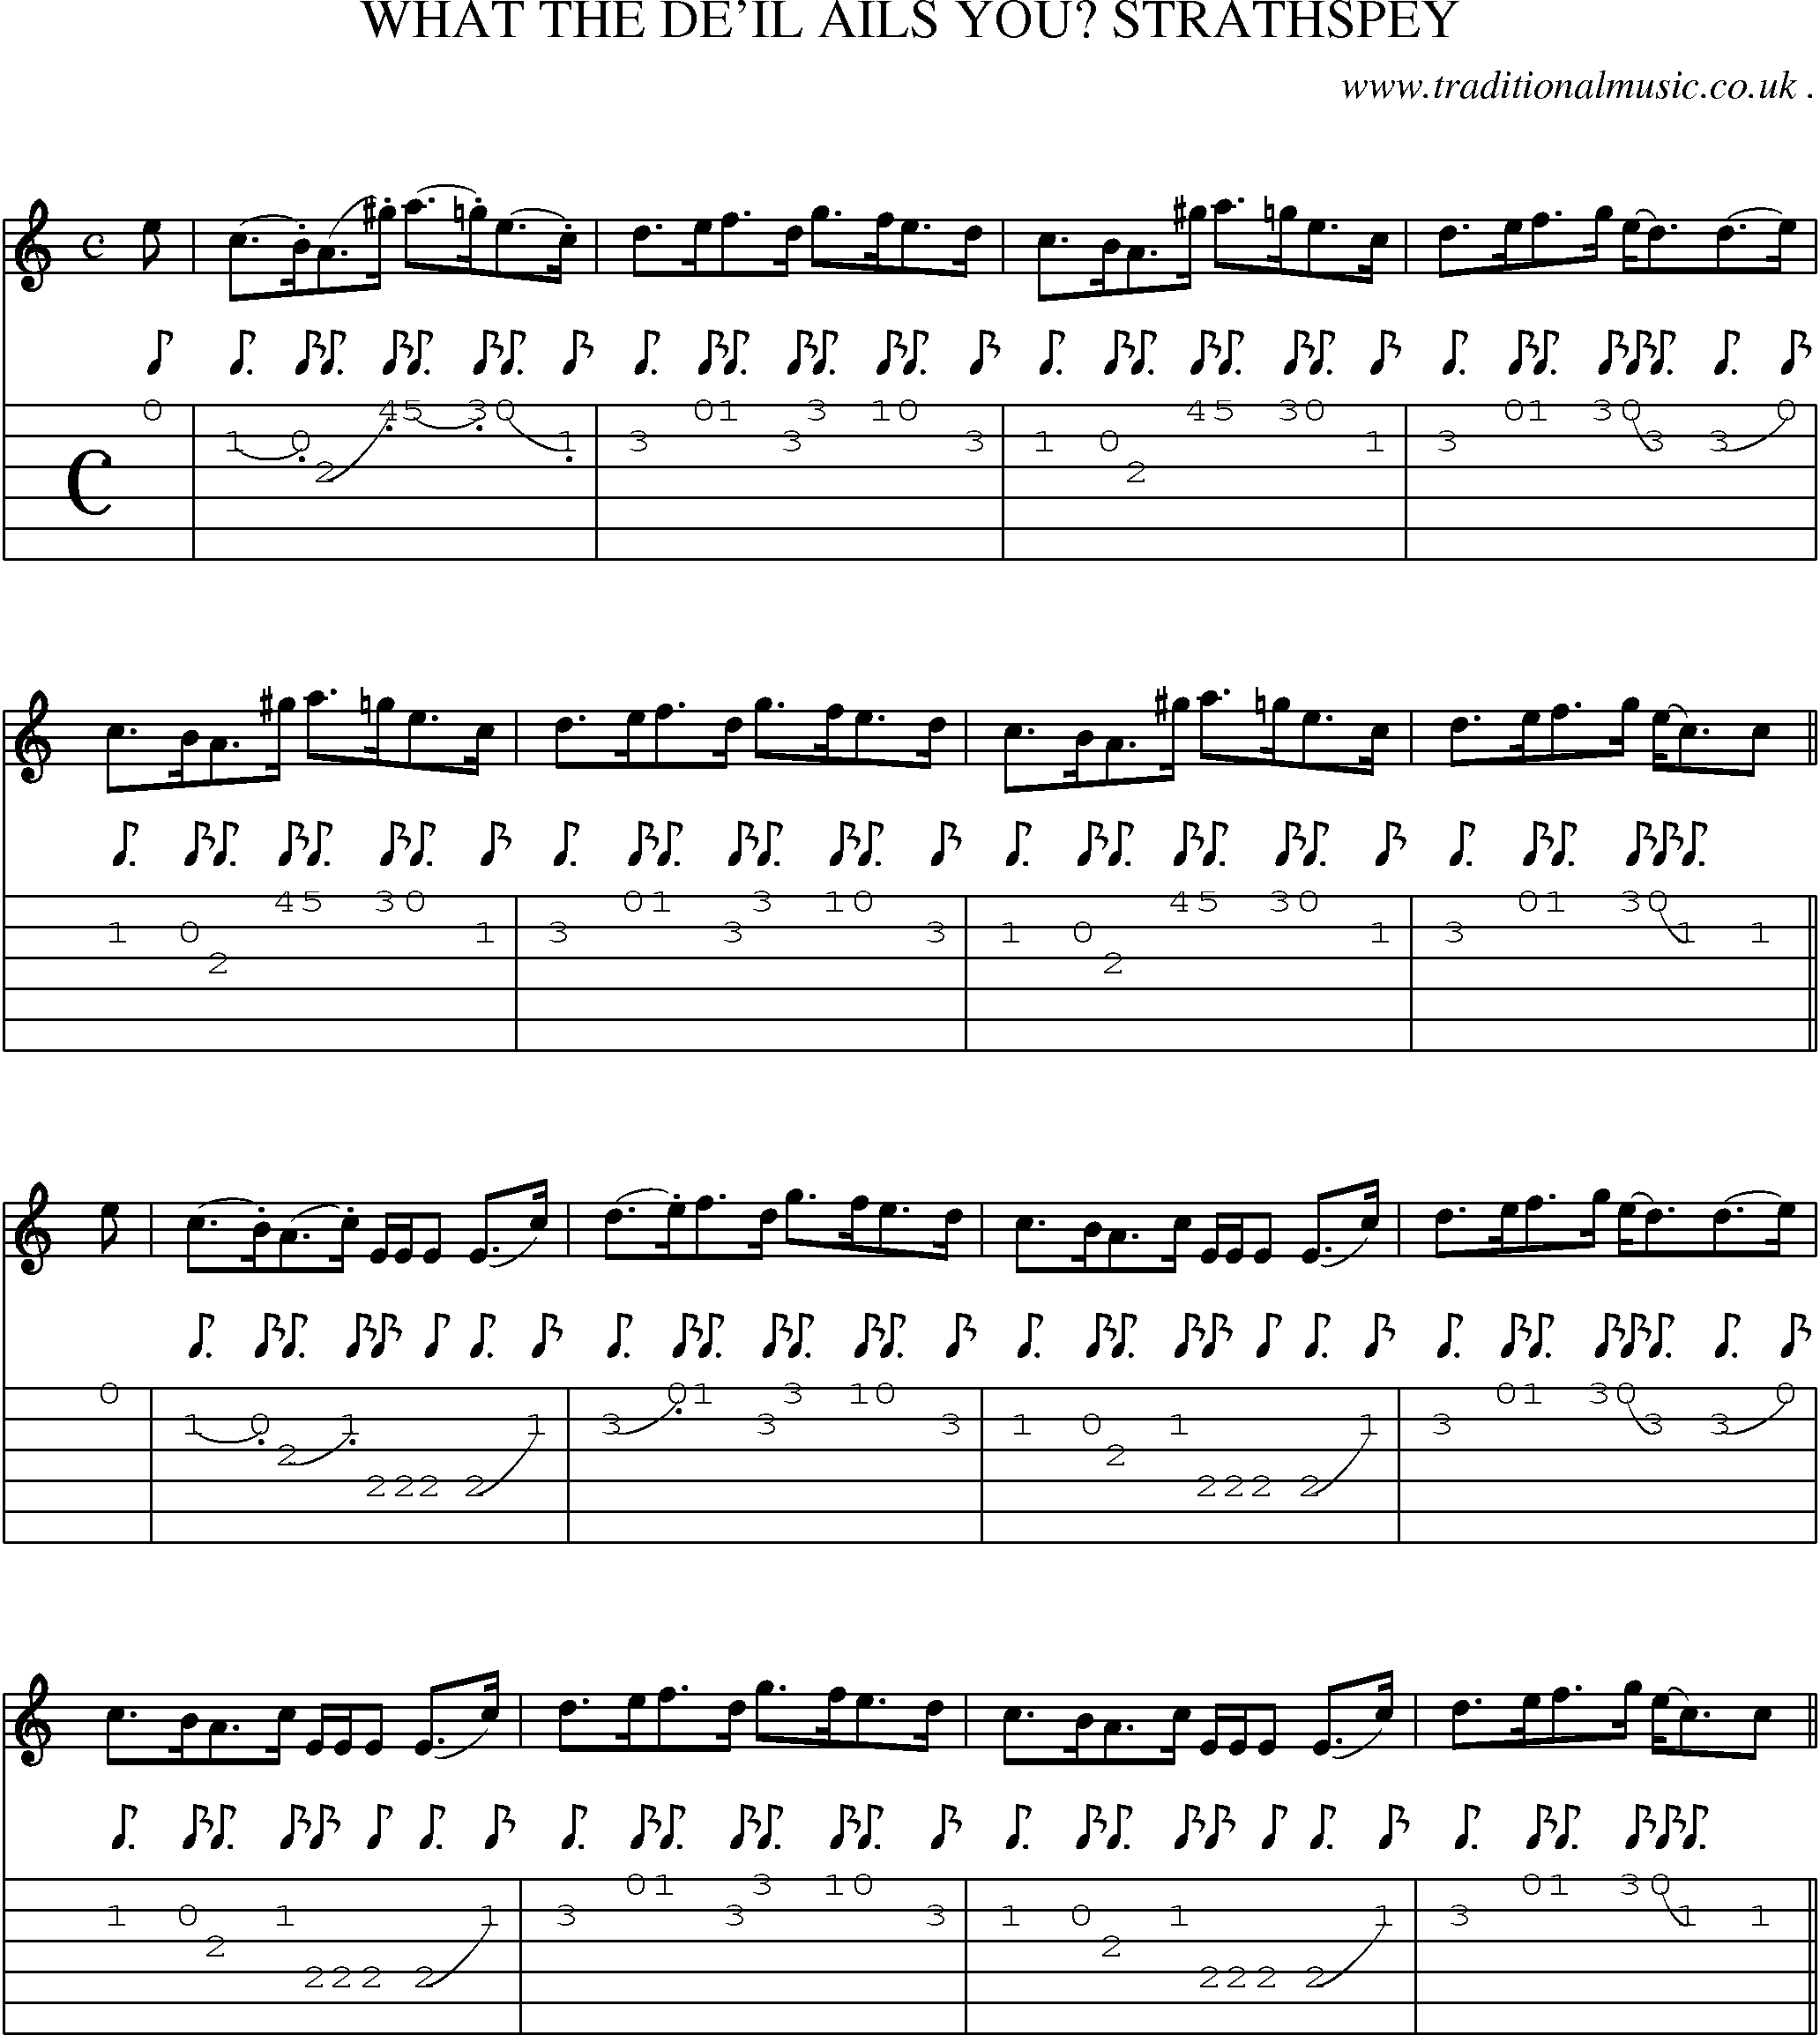 Sheet-Music and Guitar Tabs for What The Deil Ails You Strathspey